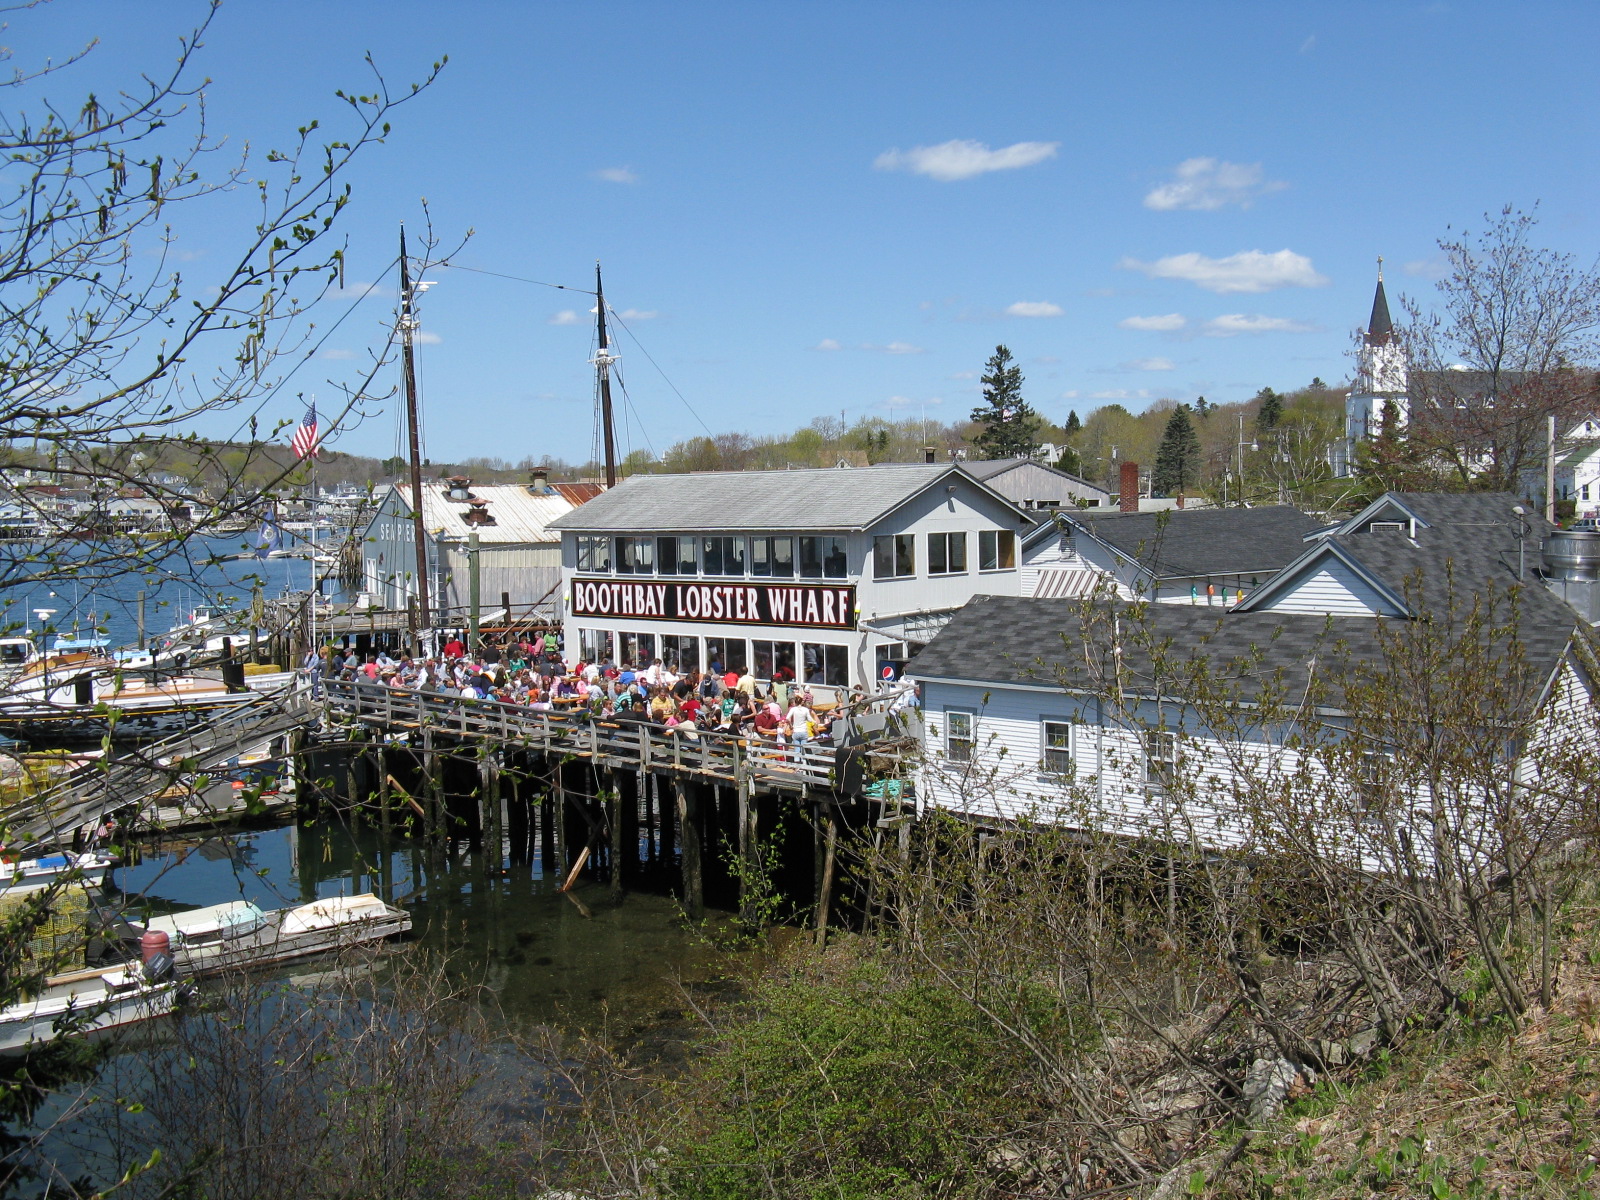 Boothbay Lobster Wharf (user submitted)